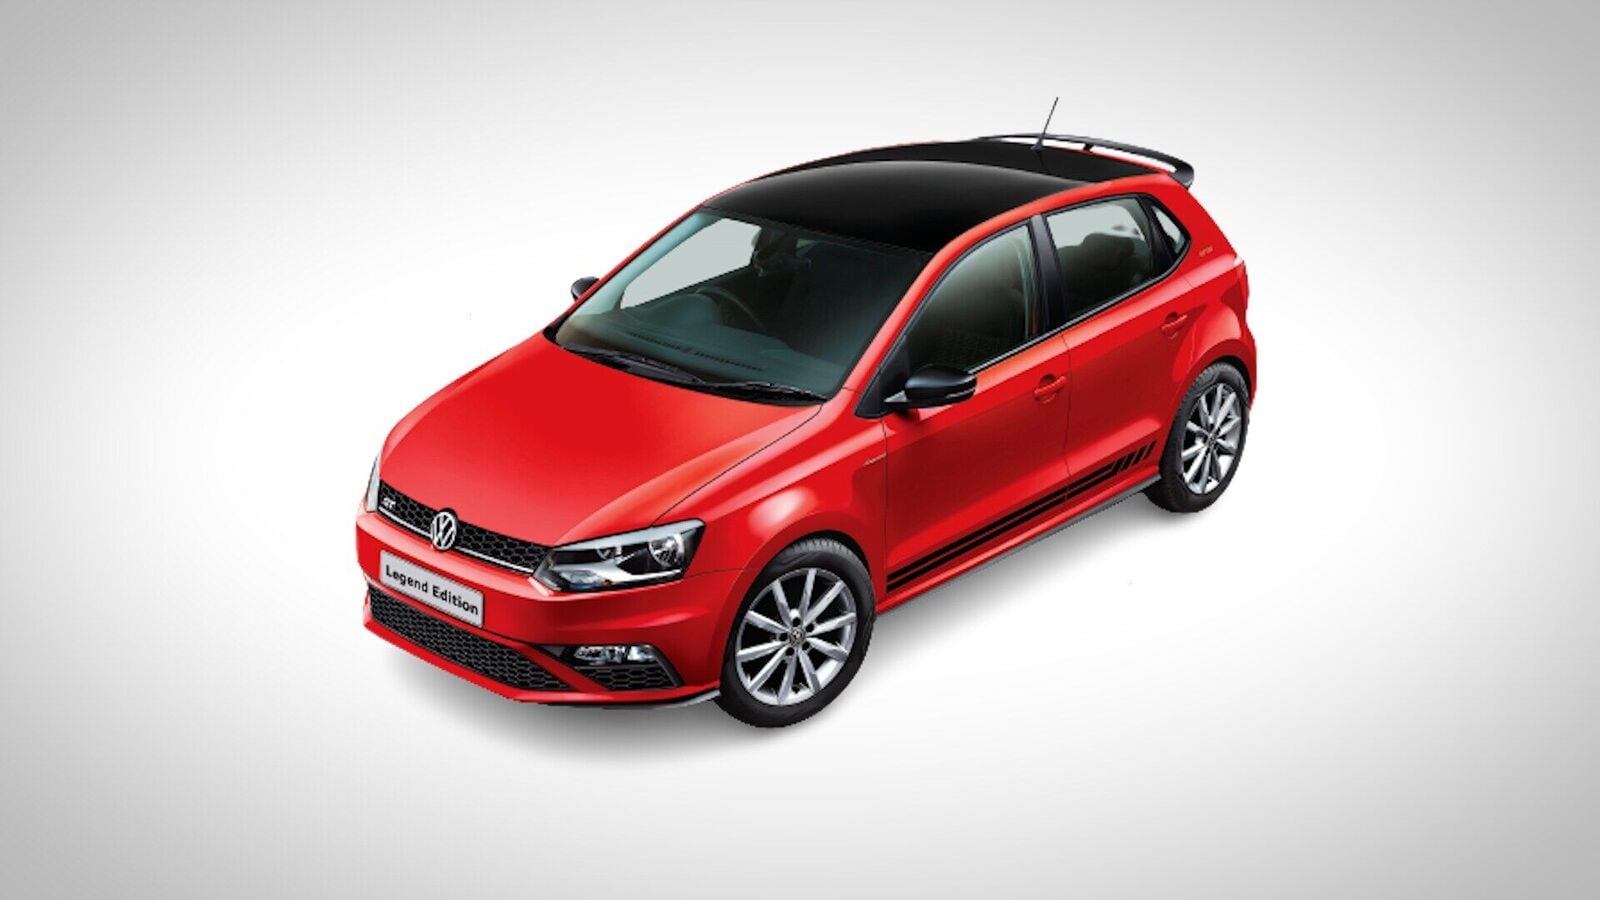 Volkswagen Polo Legend limited edition launched in India at ₹10.25 lakh